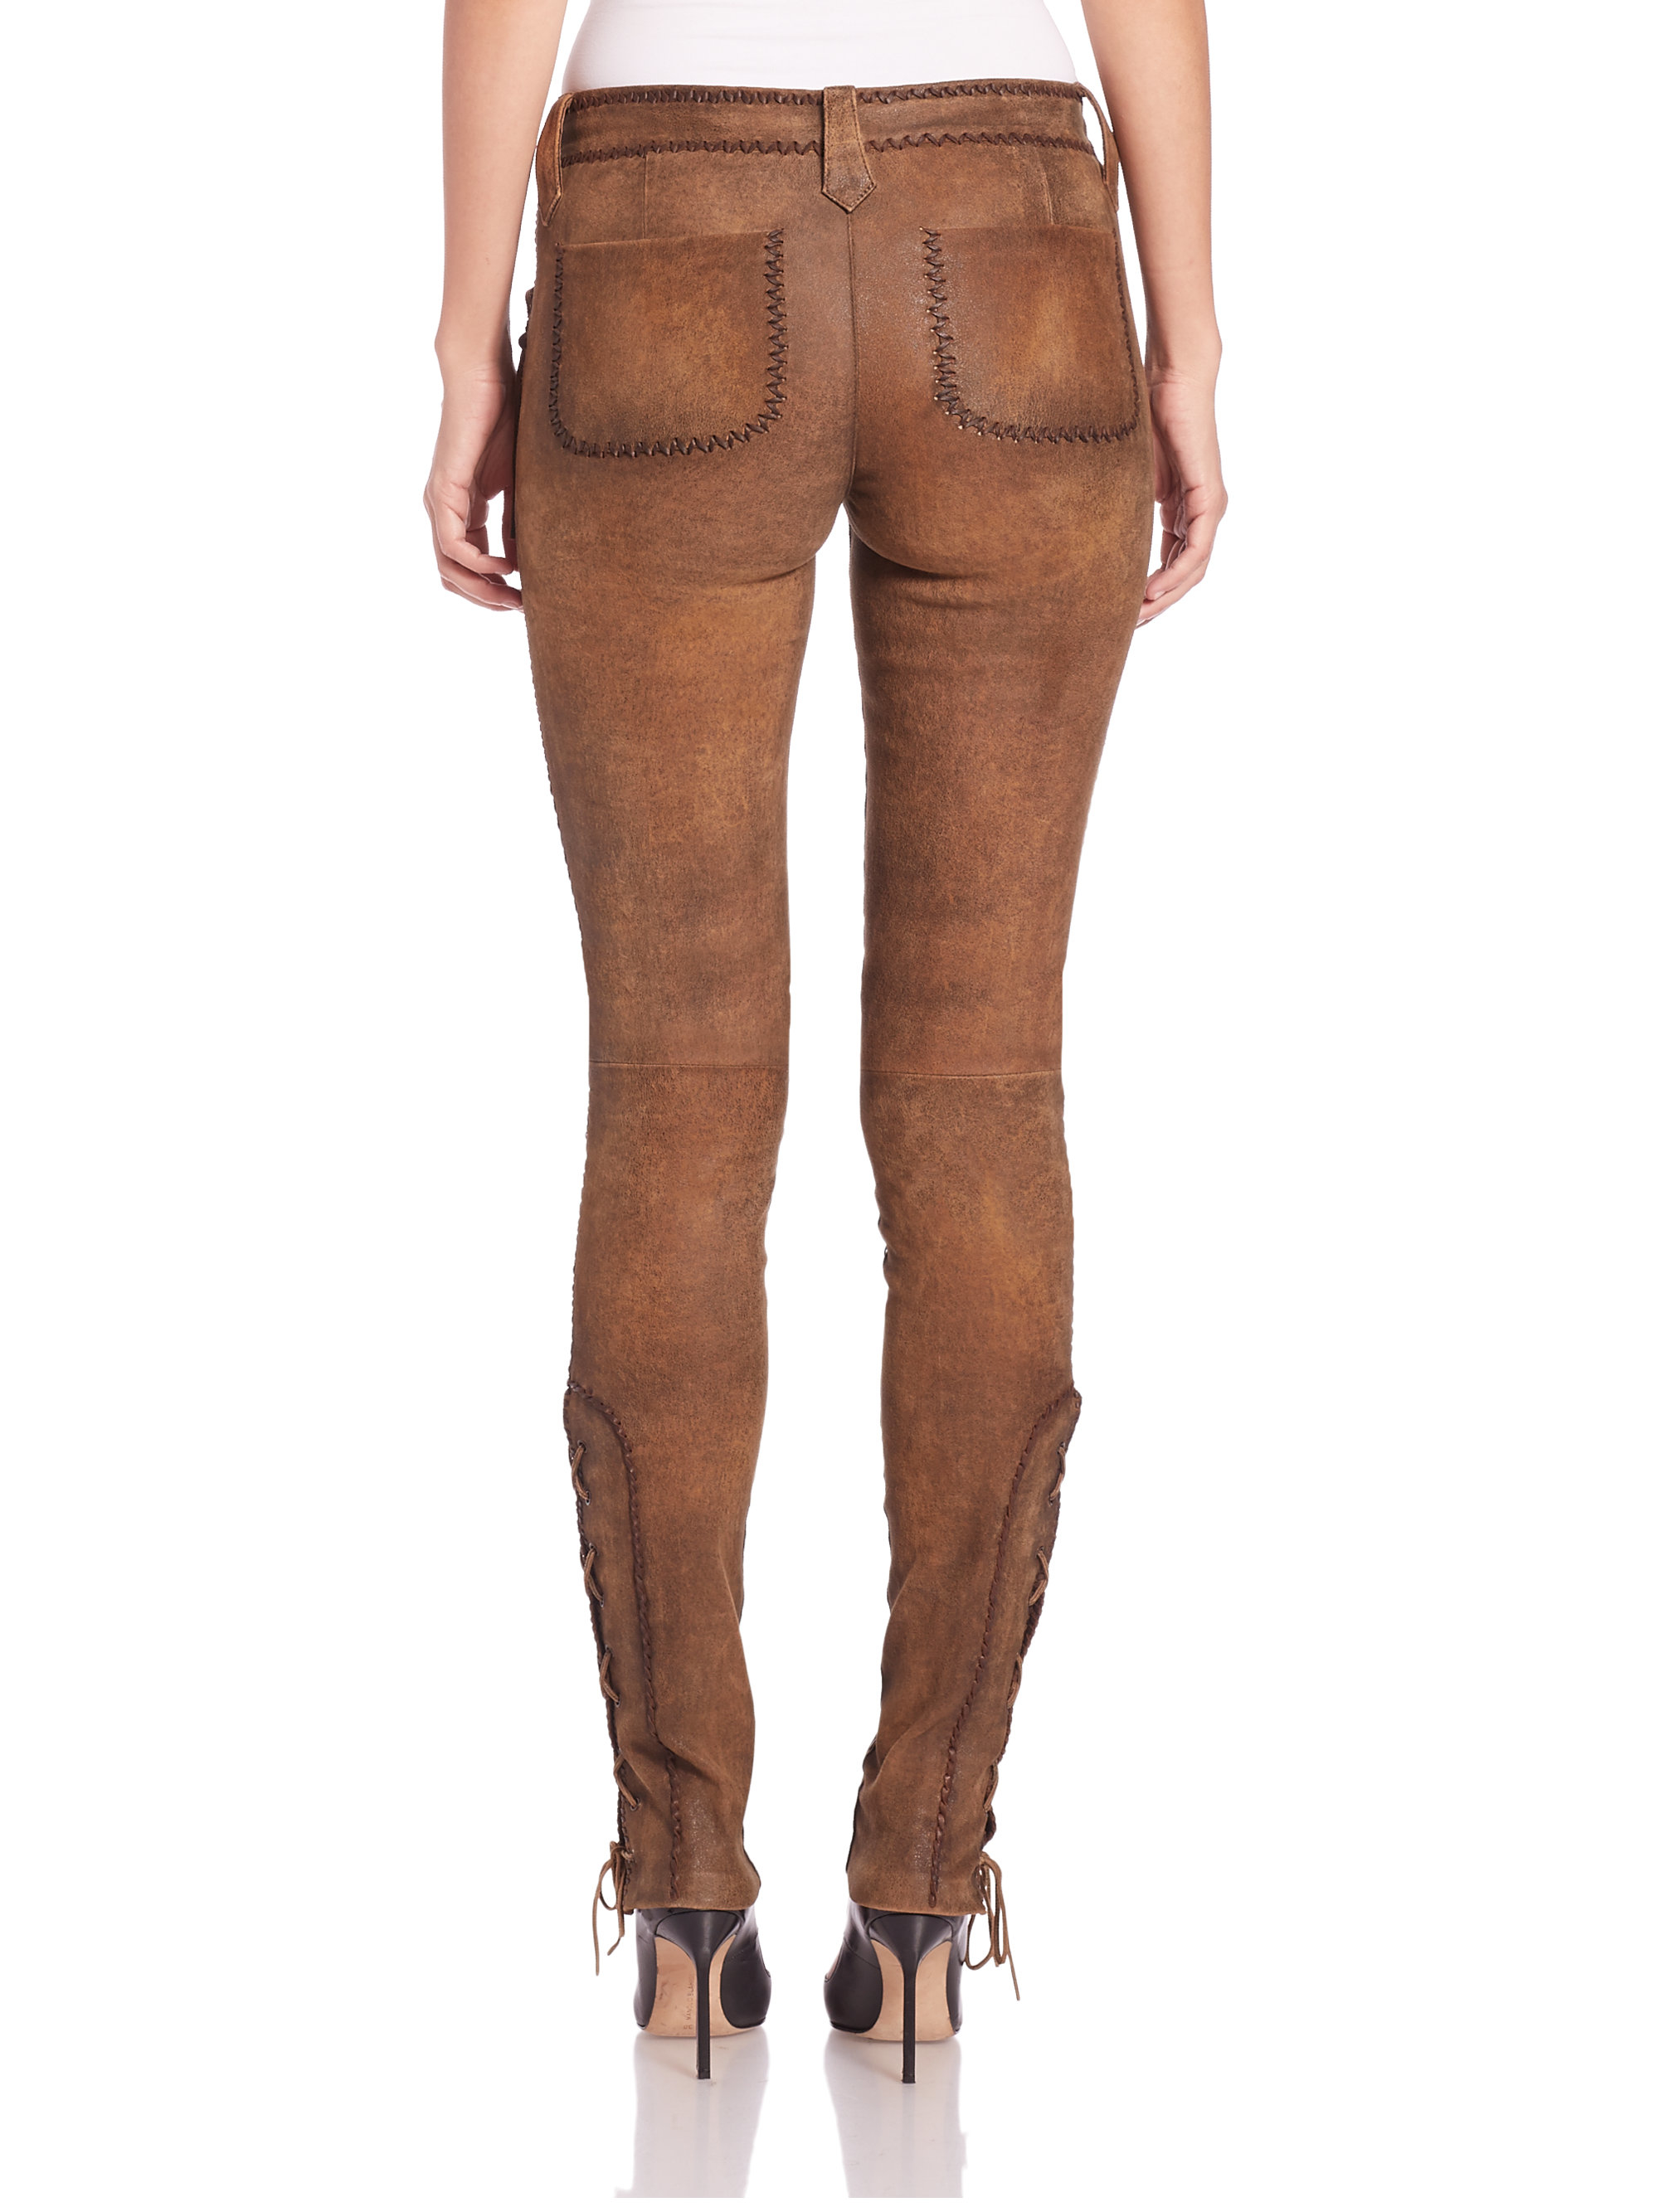 Polo Ralph Lauren Fringed Stretch Leather Pants in Brown | Lyst